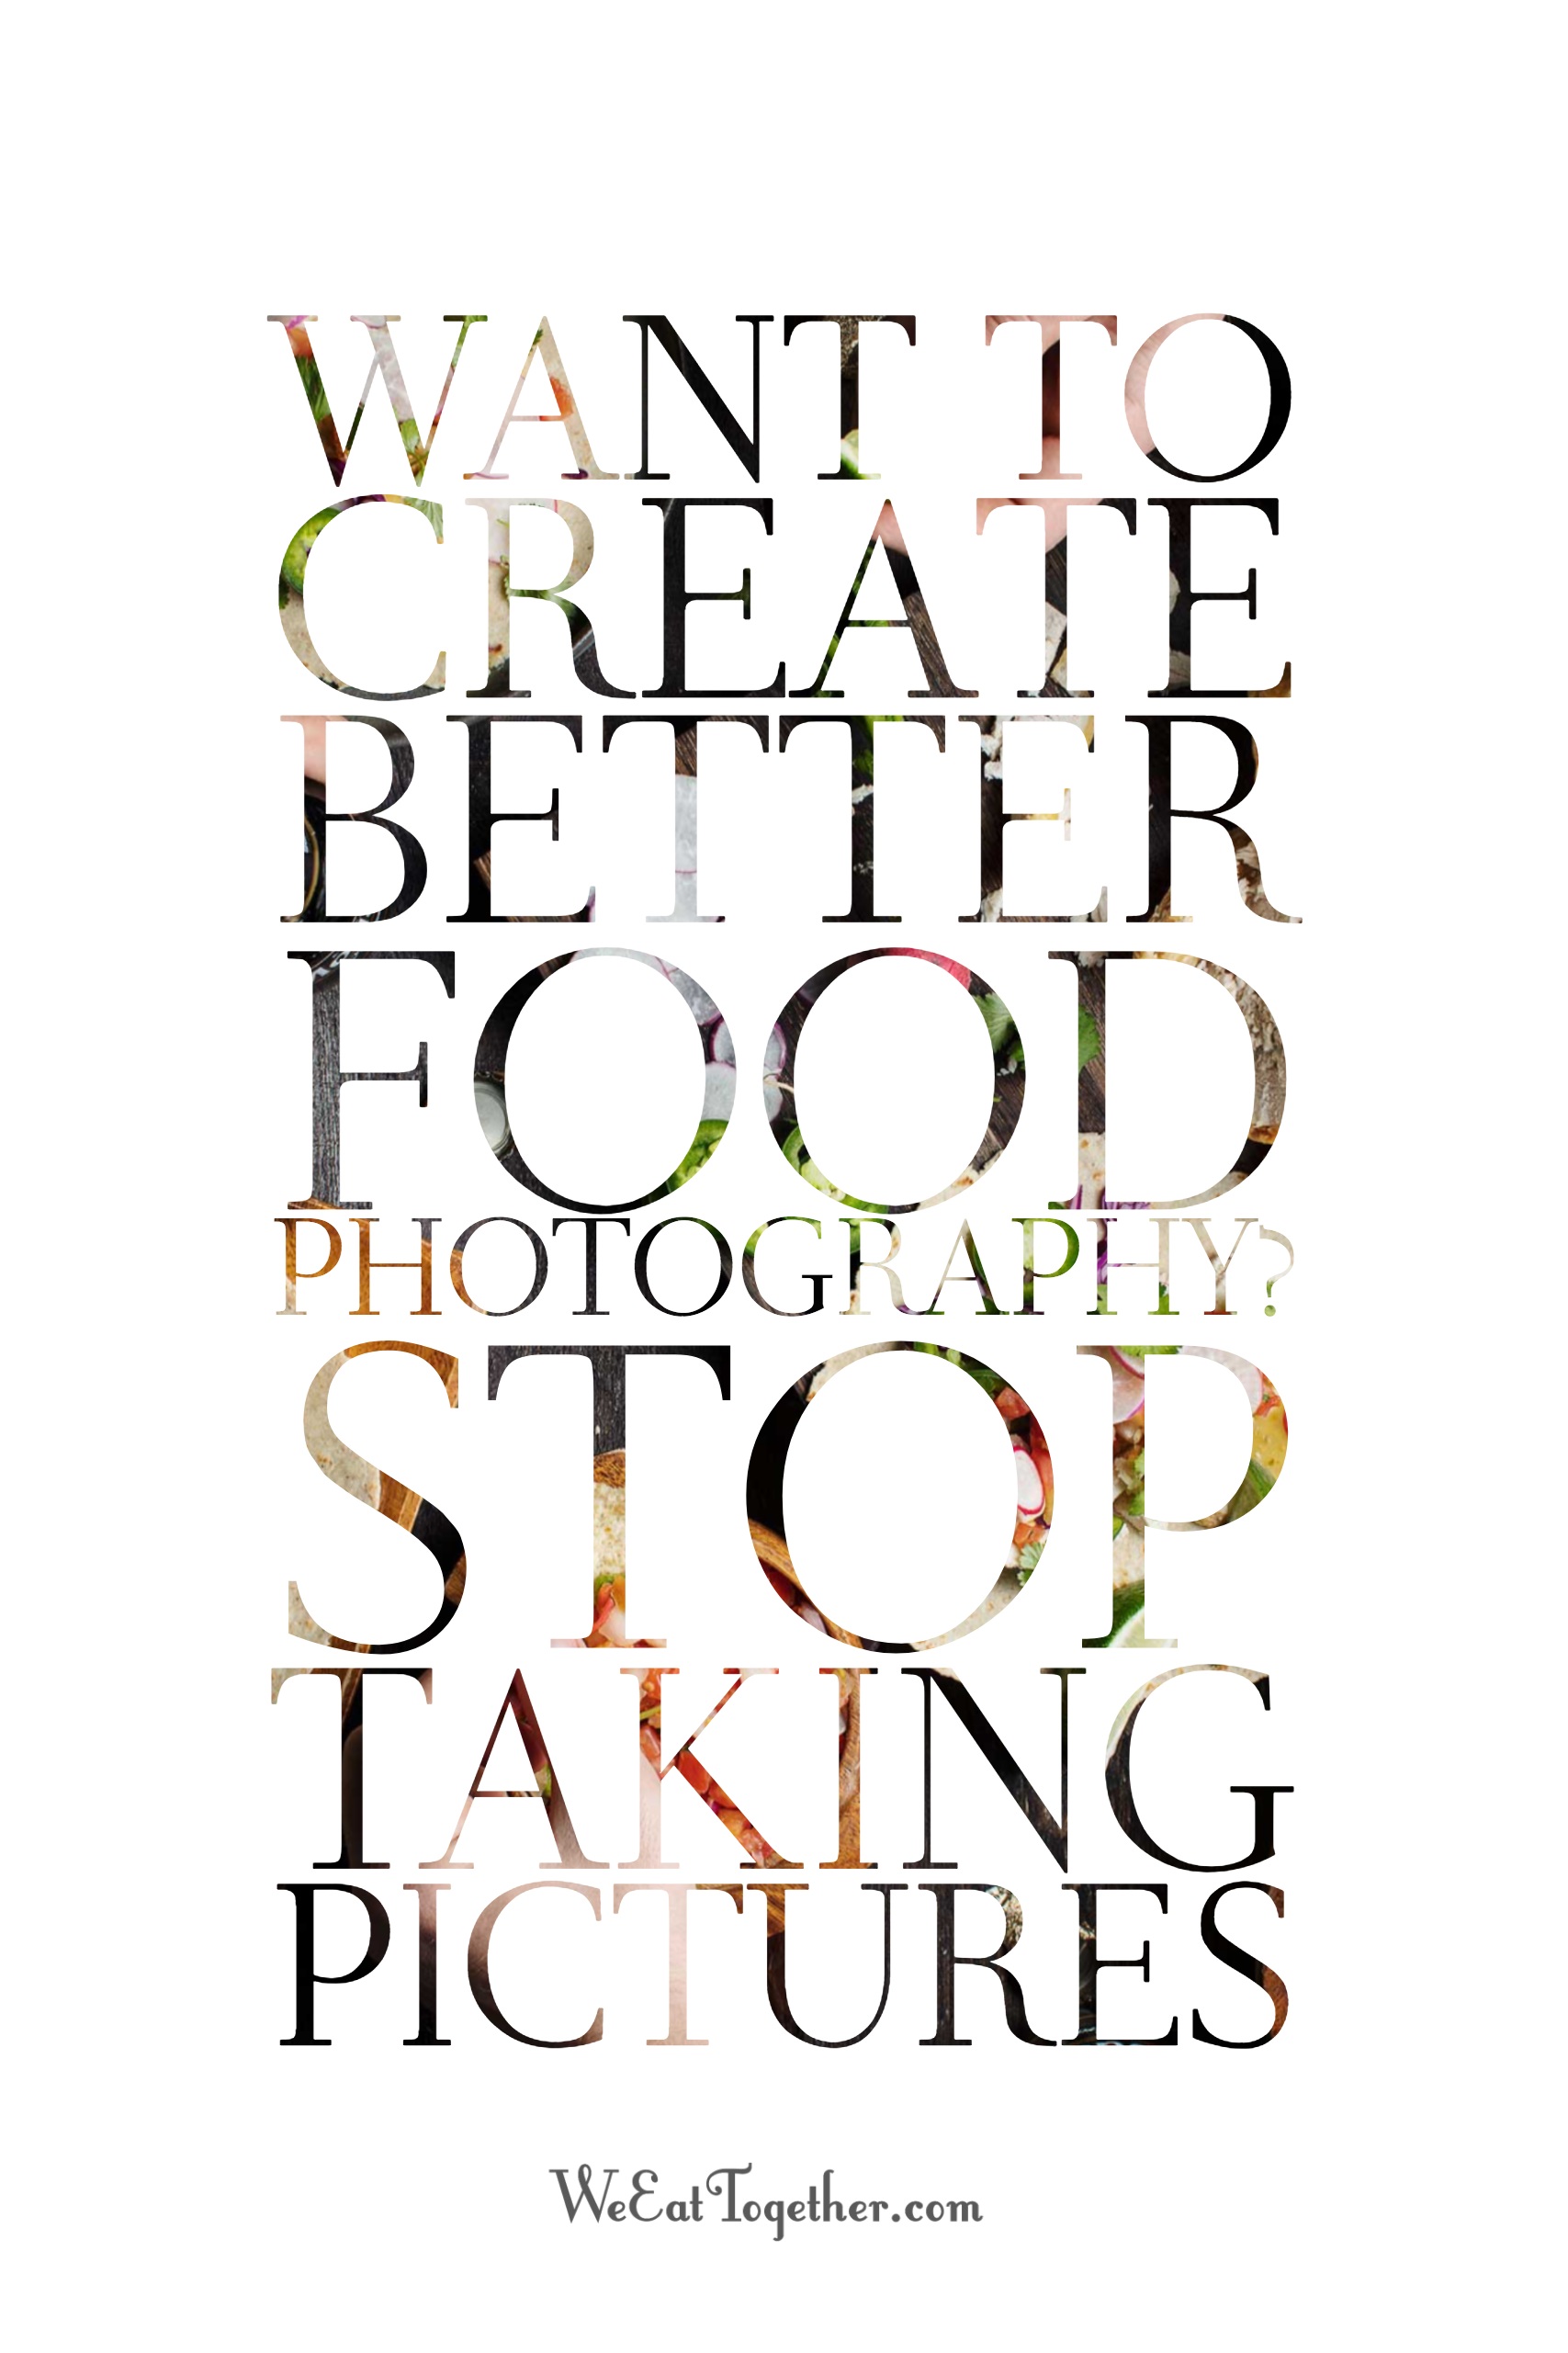 Want To Create Better Food Photography Stop Taking Pictures